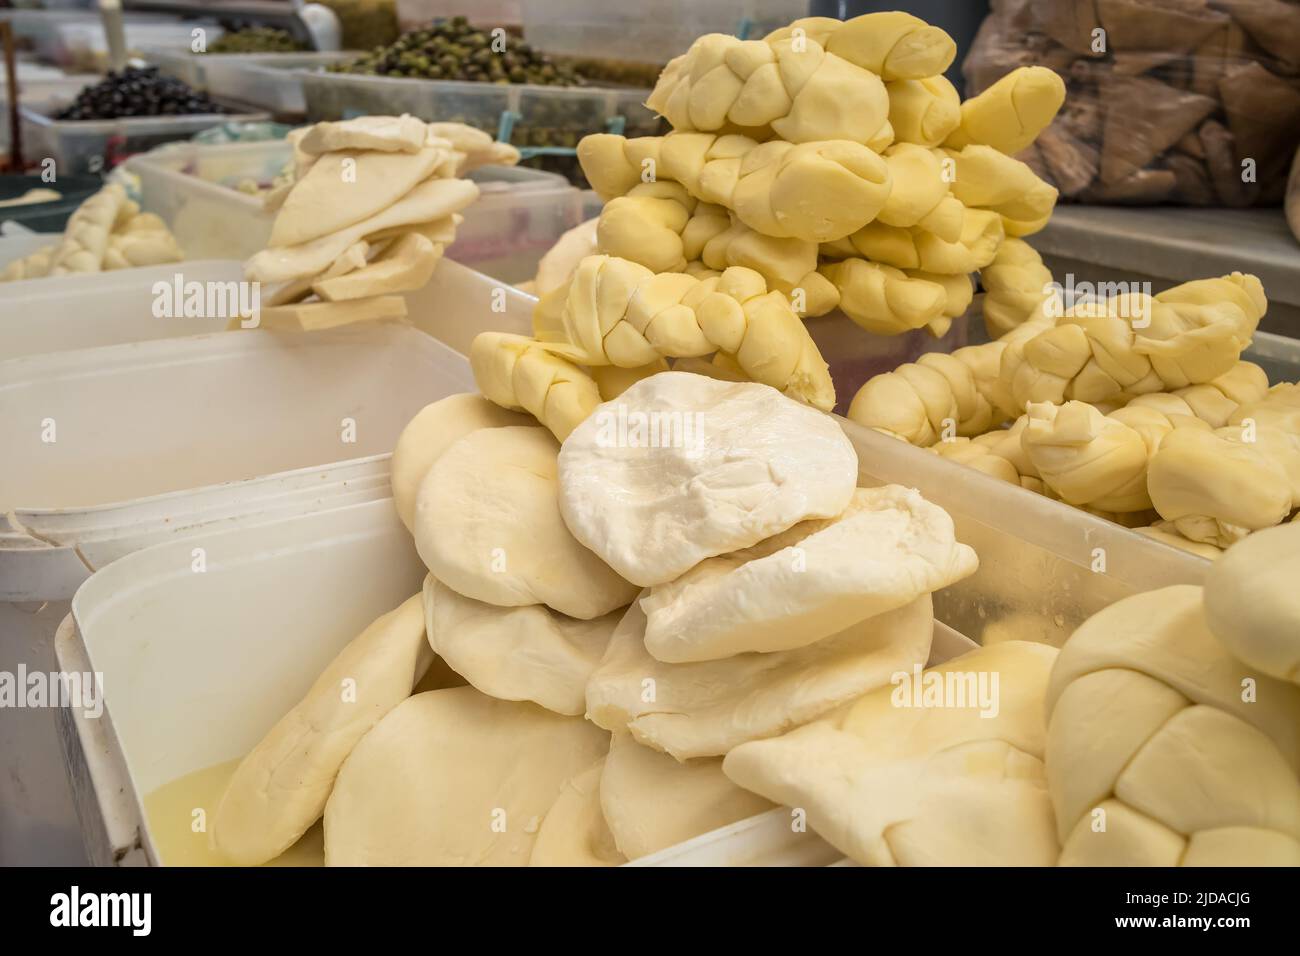 White soft braid cow cheese on market display in Turkey close-up Stock Photo